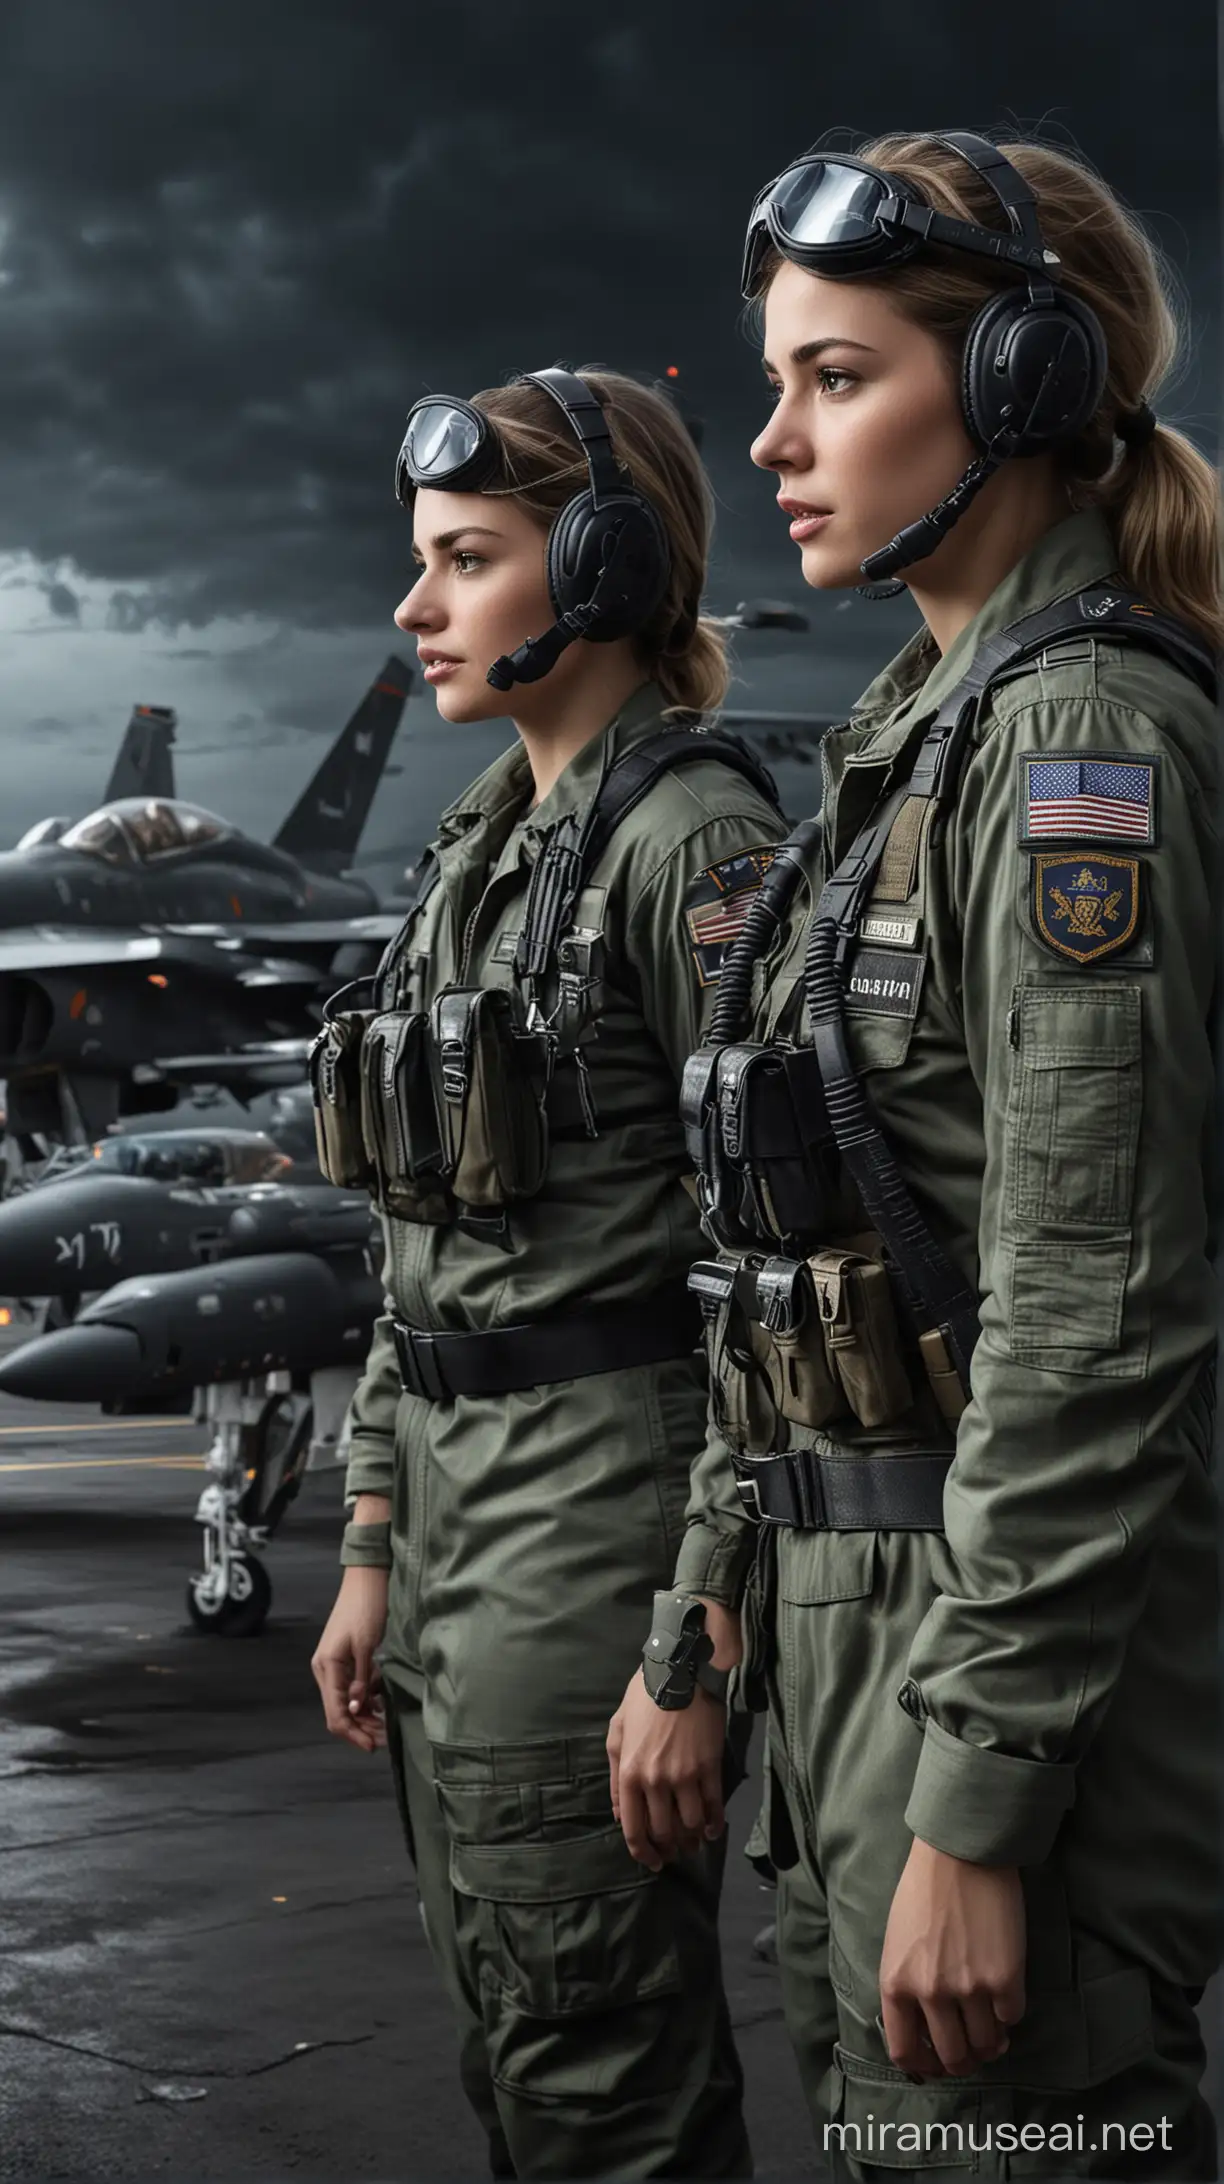 Illustration of the female pilots undergoing training for nocturnal bombing missions, highlighting their preparation for combat.Hyper realistic